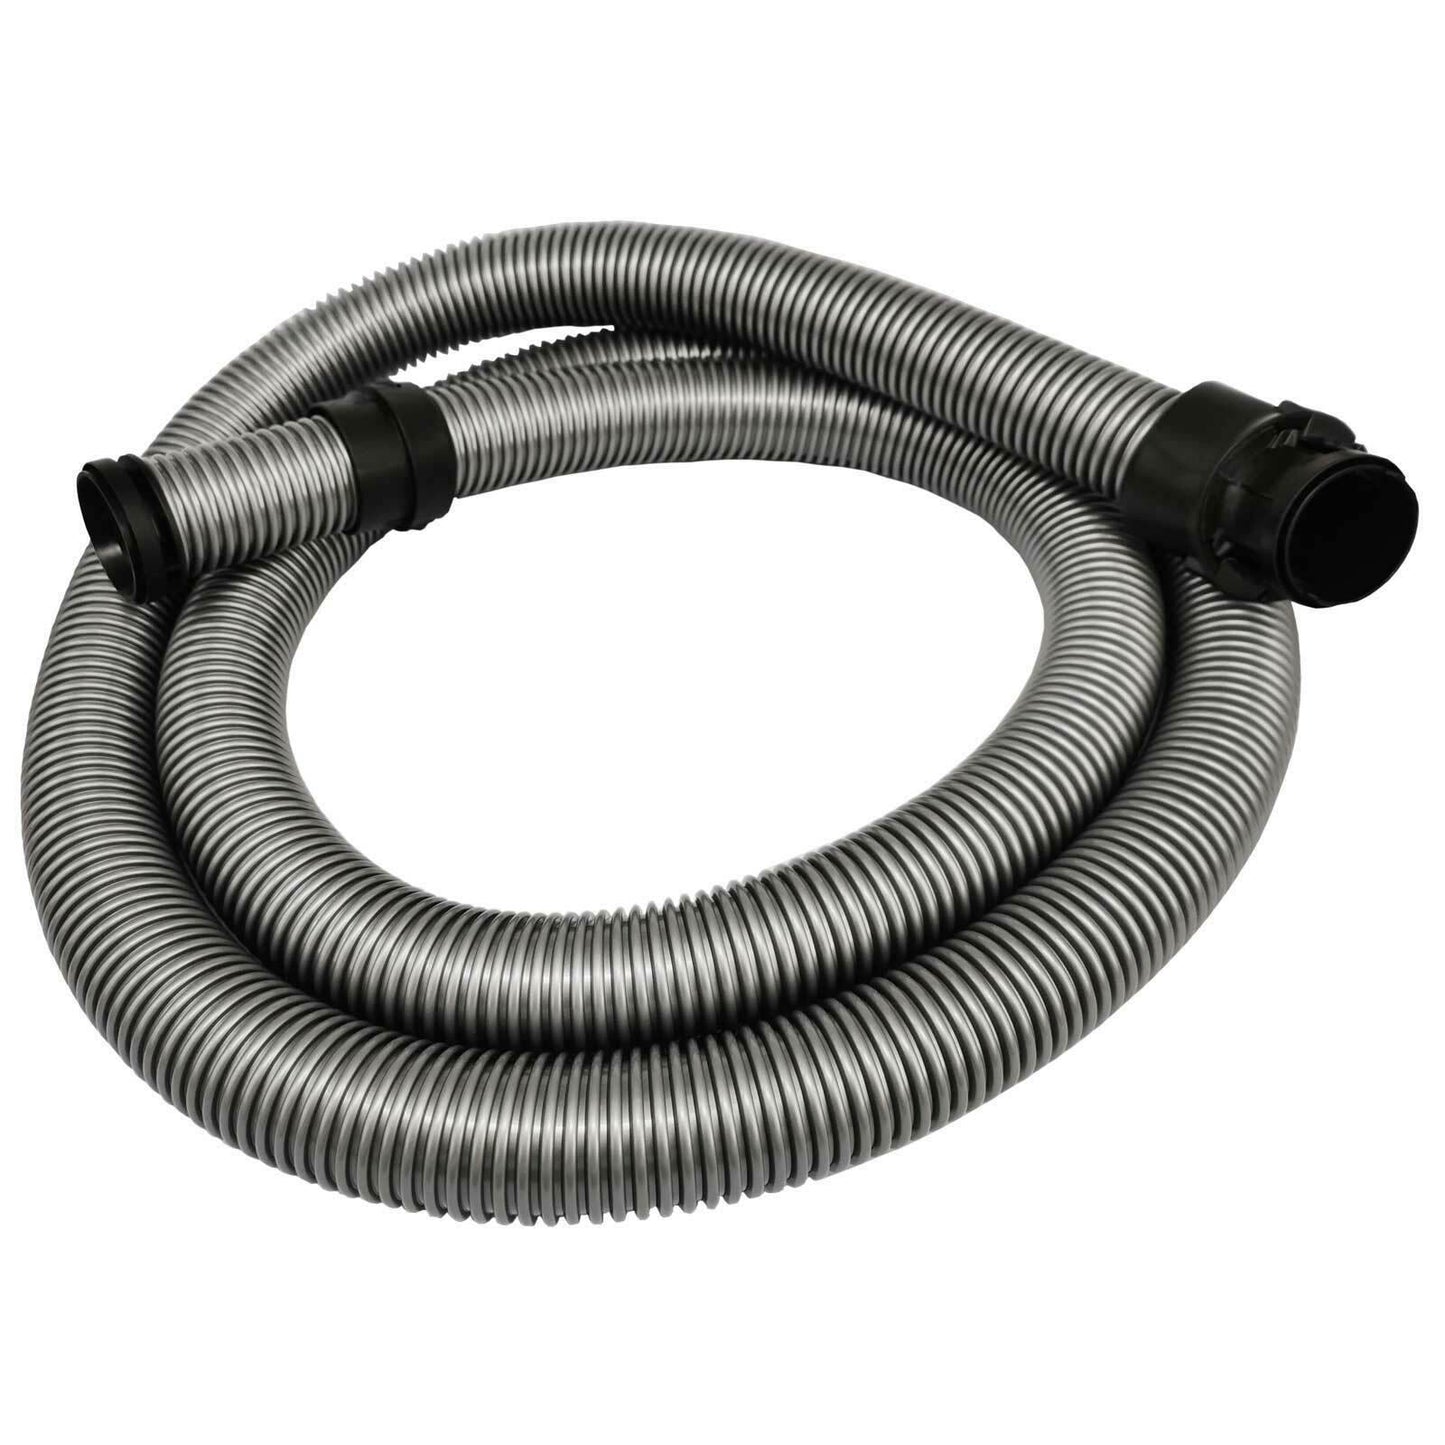 Suction Tube Hose 2.5M For Miele 7863553 7863554 7863555 107212 S8 Series Sparesbarn